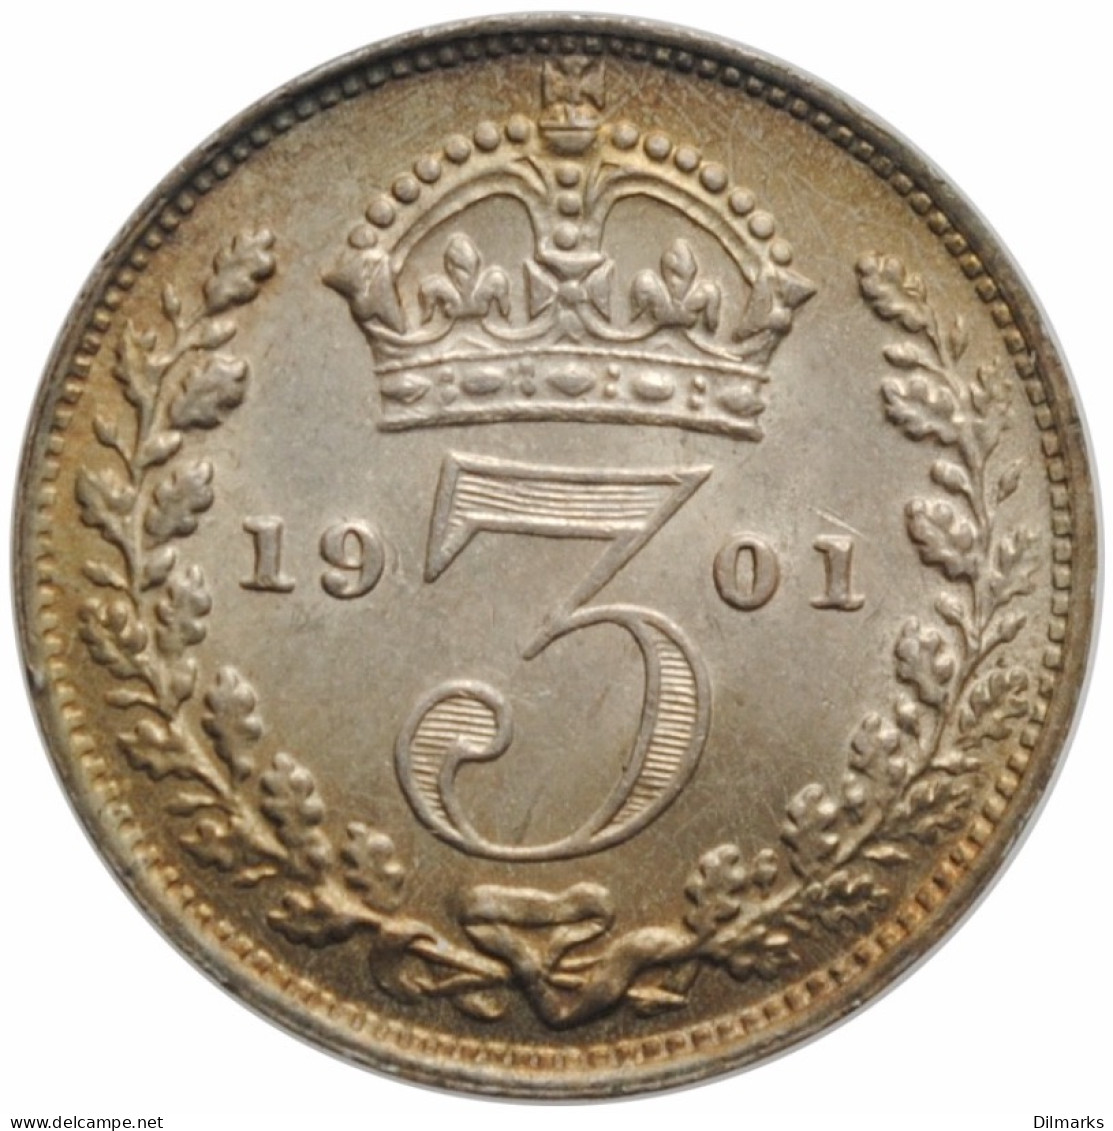 Great Britain (Maundy) 3 Pence 1901, NGC MS64, &quot;Queen Victoria (1838 - 1901)&quot; - Gibraltar